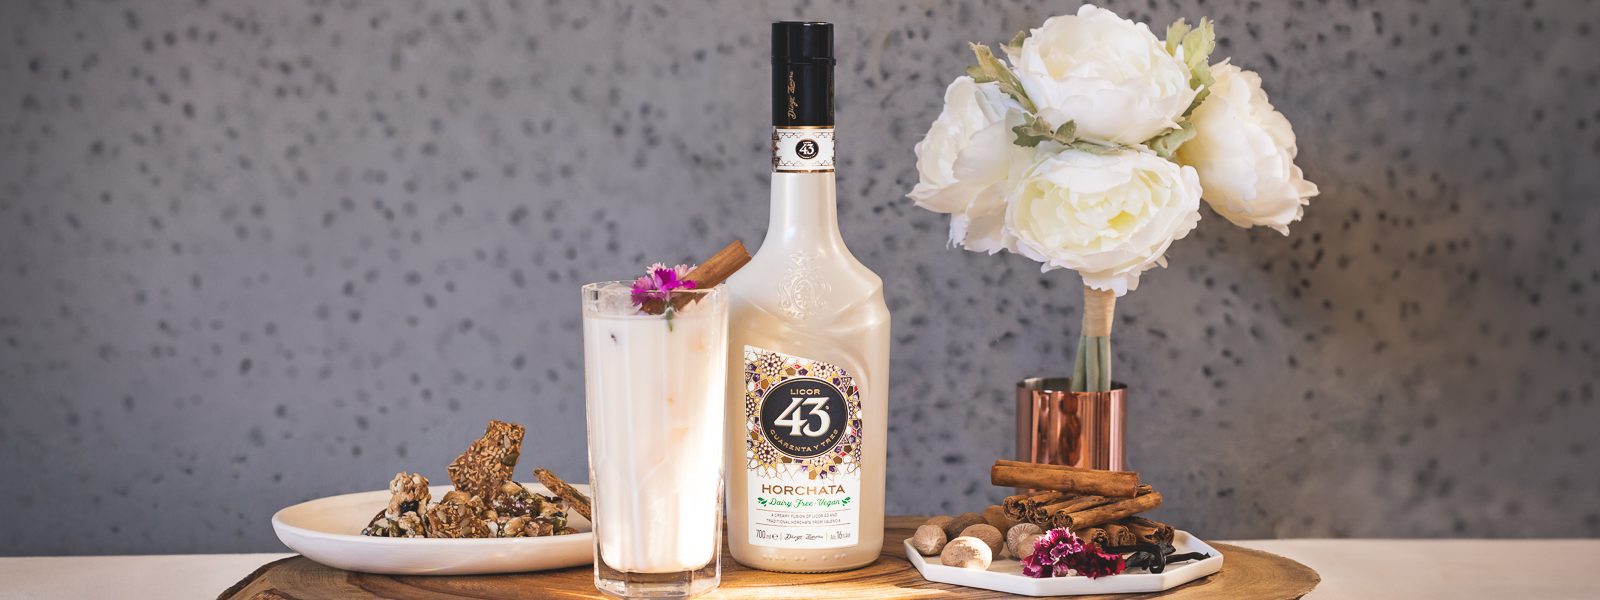 Licor 43 Horchata The Sweet Vegan 43 in tall glass with licor 43 horchata bottle and set dressing